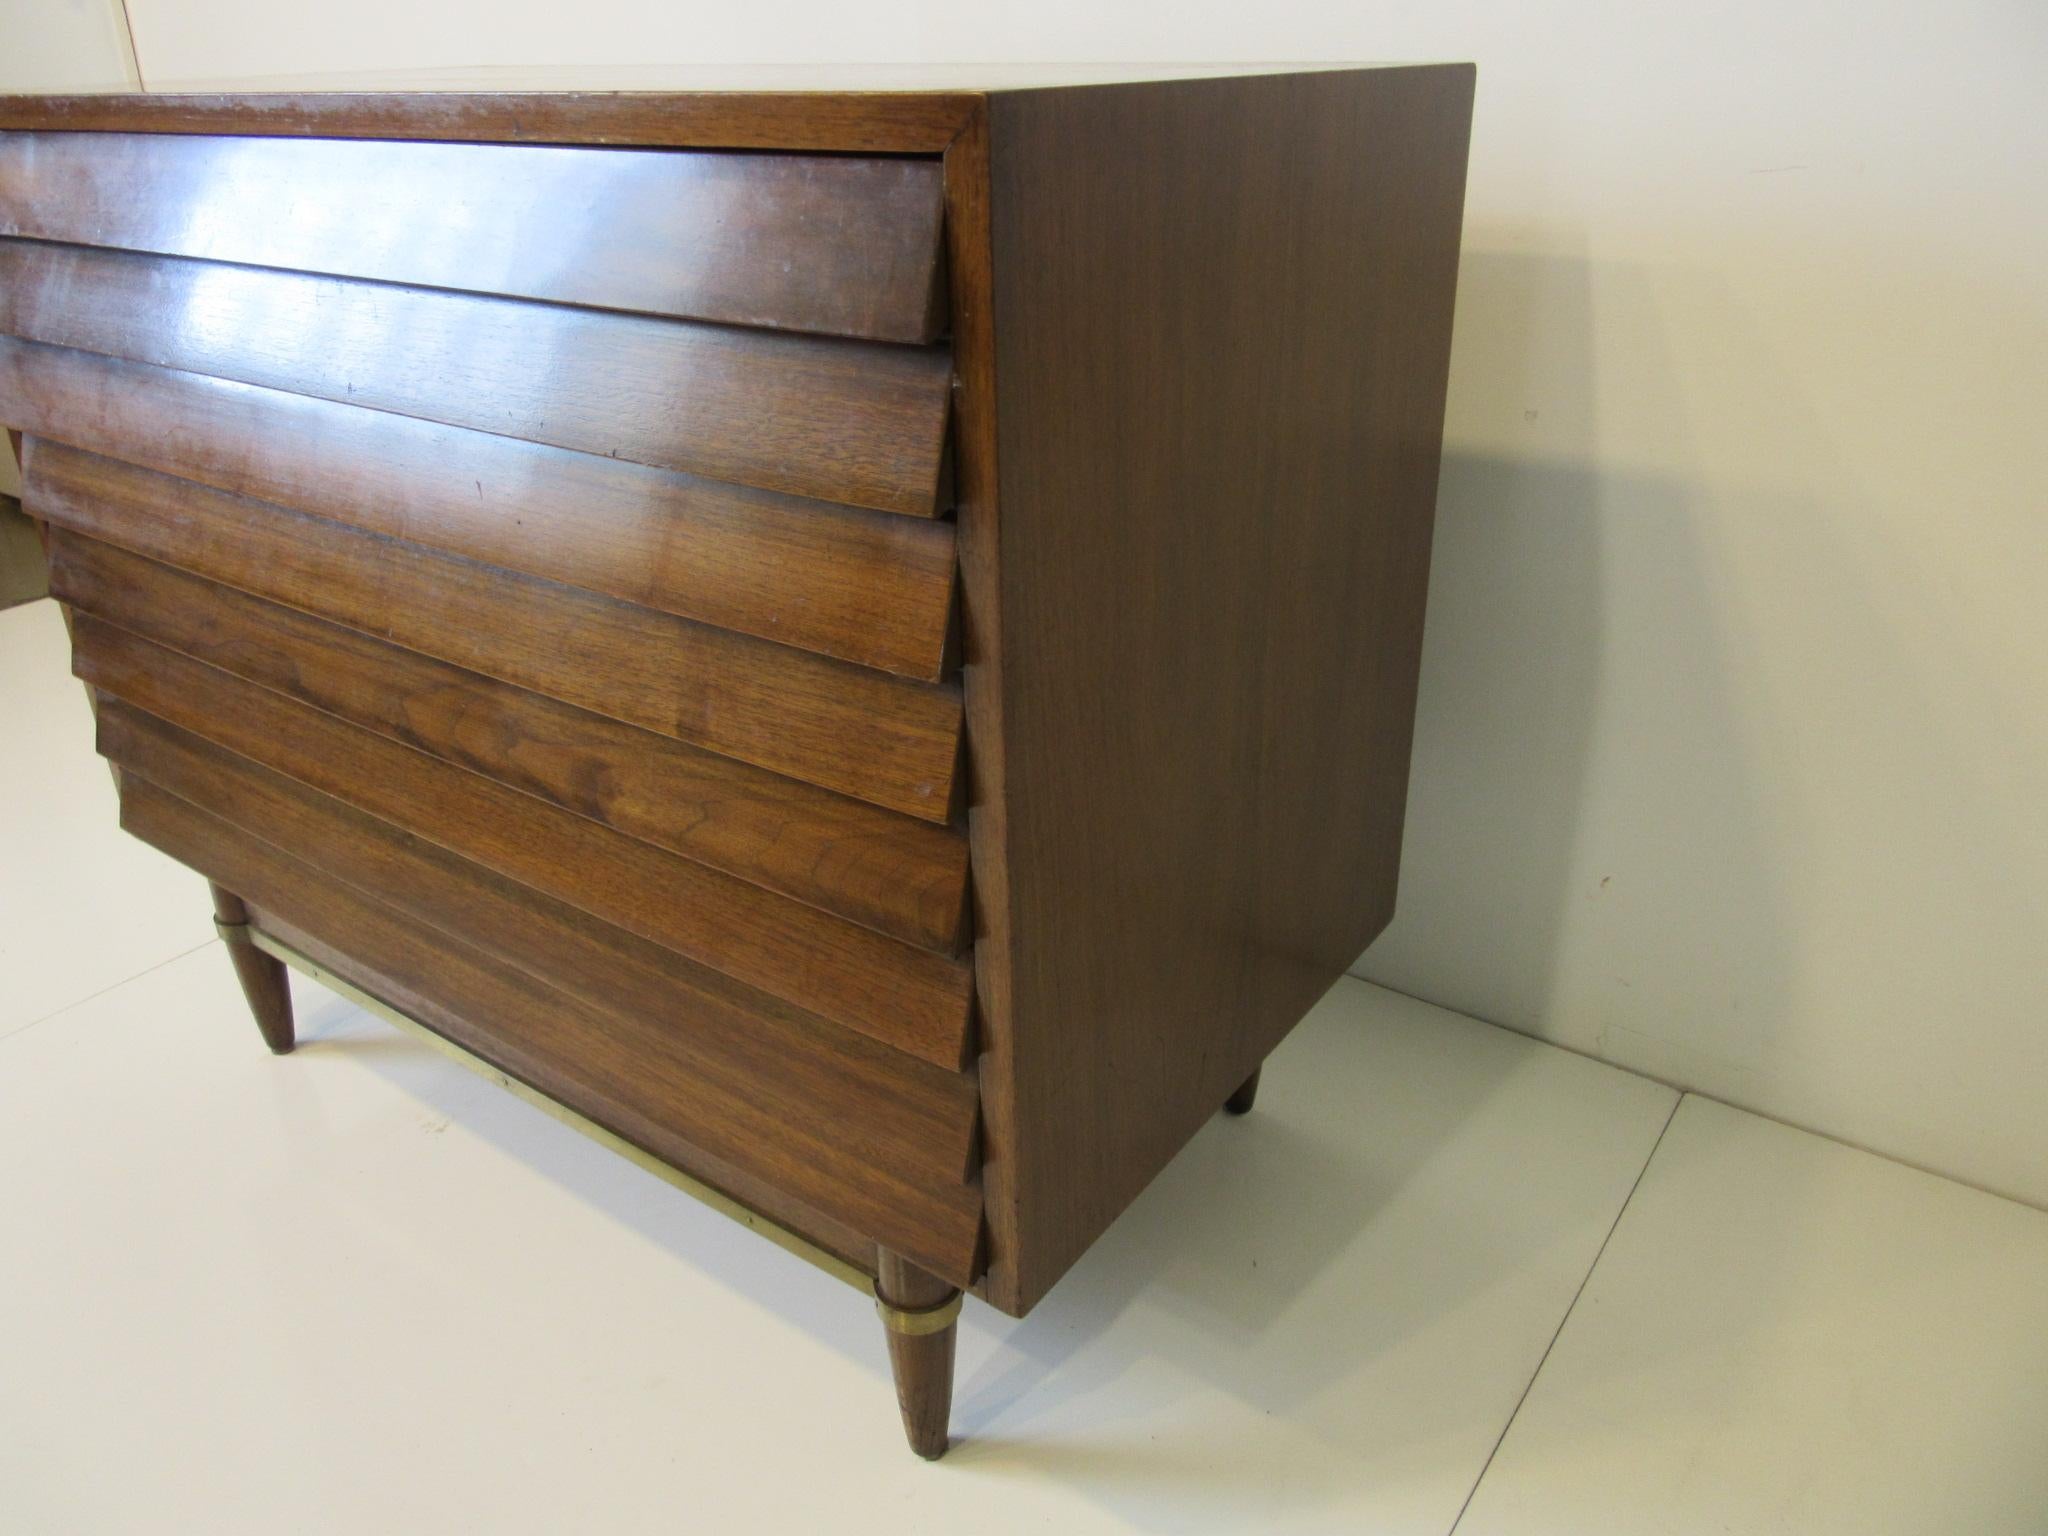 A smaller scale and well constructed walnut dresser/ chest with three large drawers the top one having dividers. The louvered front drawers gives this piece a high style sitting on conical legs with brass stretchers manufactured by American of